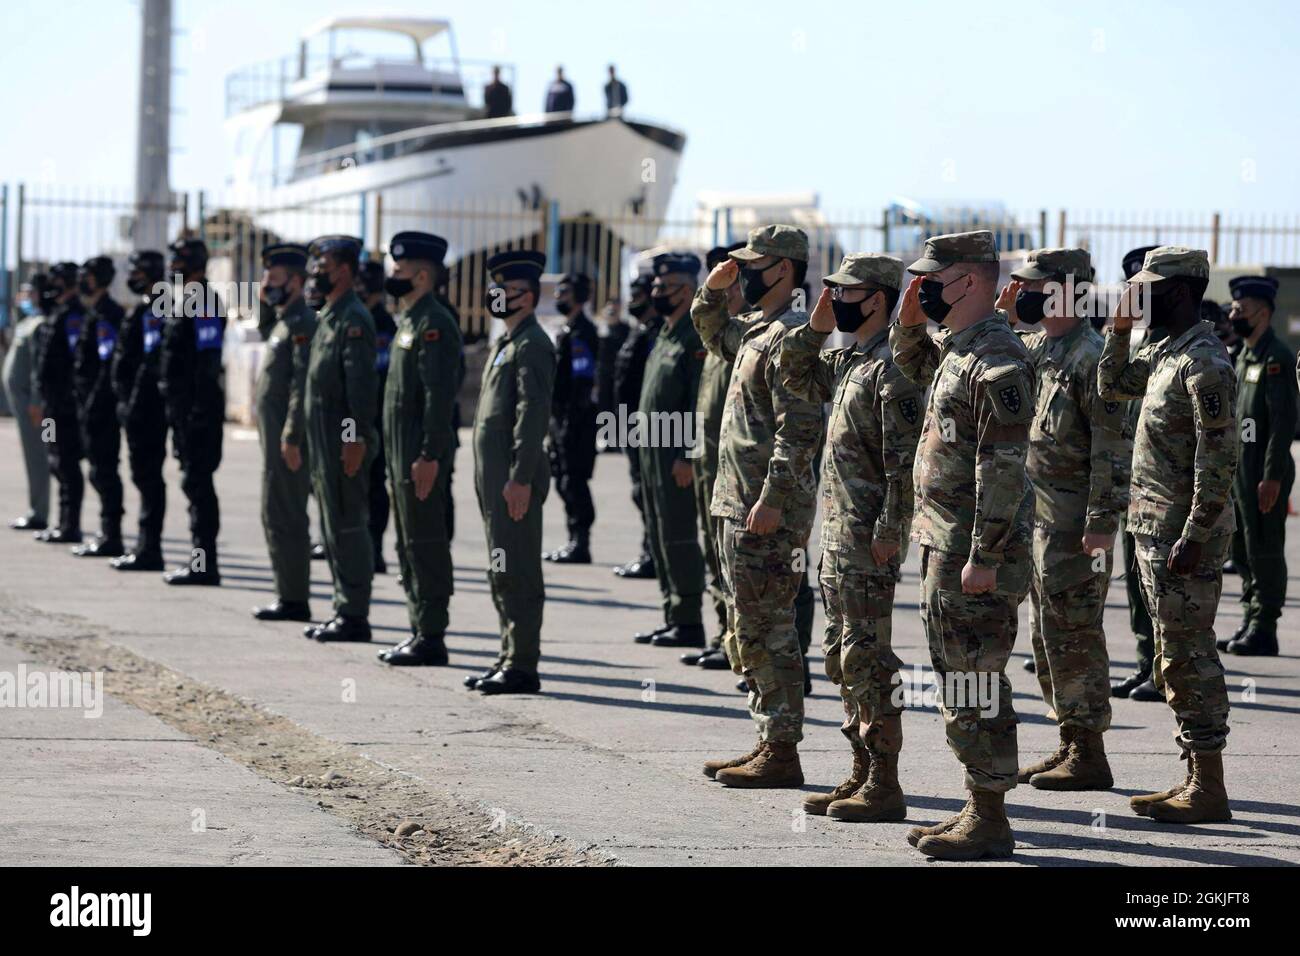 U.S. Army Soldiers, standing beside Albanian military partners, salute the flag May 2, 2021, during the opening DEFENDER-Europe 21 exercises at the Port of Durres, Albania. During the operations, Joint Forces, working alongside multinational allies and partners, unloaded thousands of pieces of equipment and supplies that will be forwarded to troops in the field participating in training throughout the European theater.  DEFENDER-Europe 21 is a large-scale U.S. Army-led exercise designed to build readiness and interoperability between the U.S., NATO allies and partner militaries. This year, mor Stock Photo